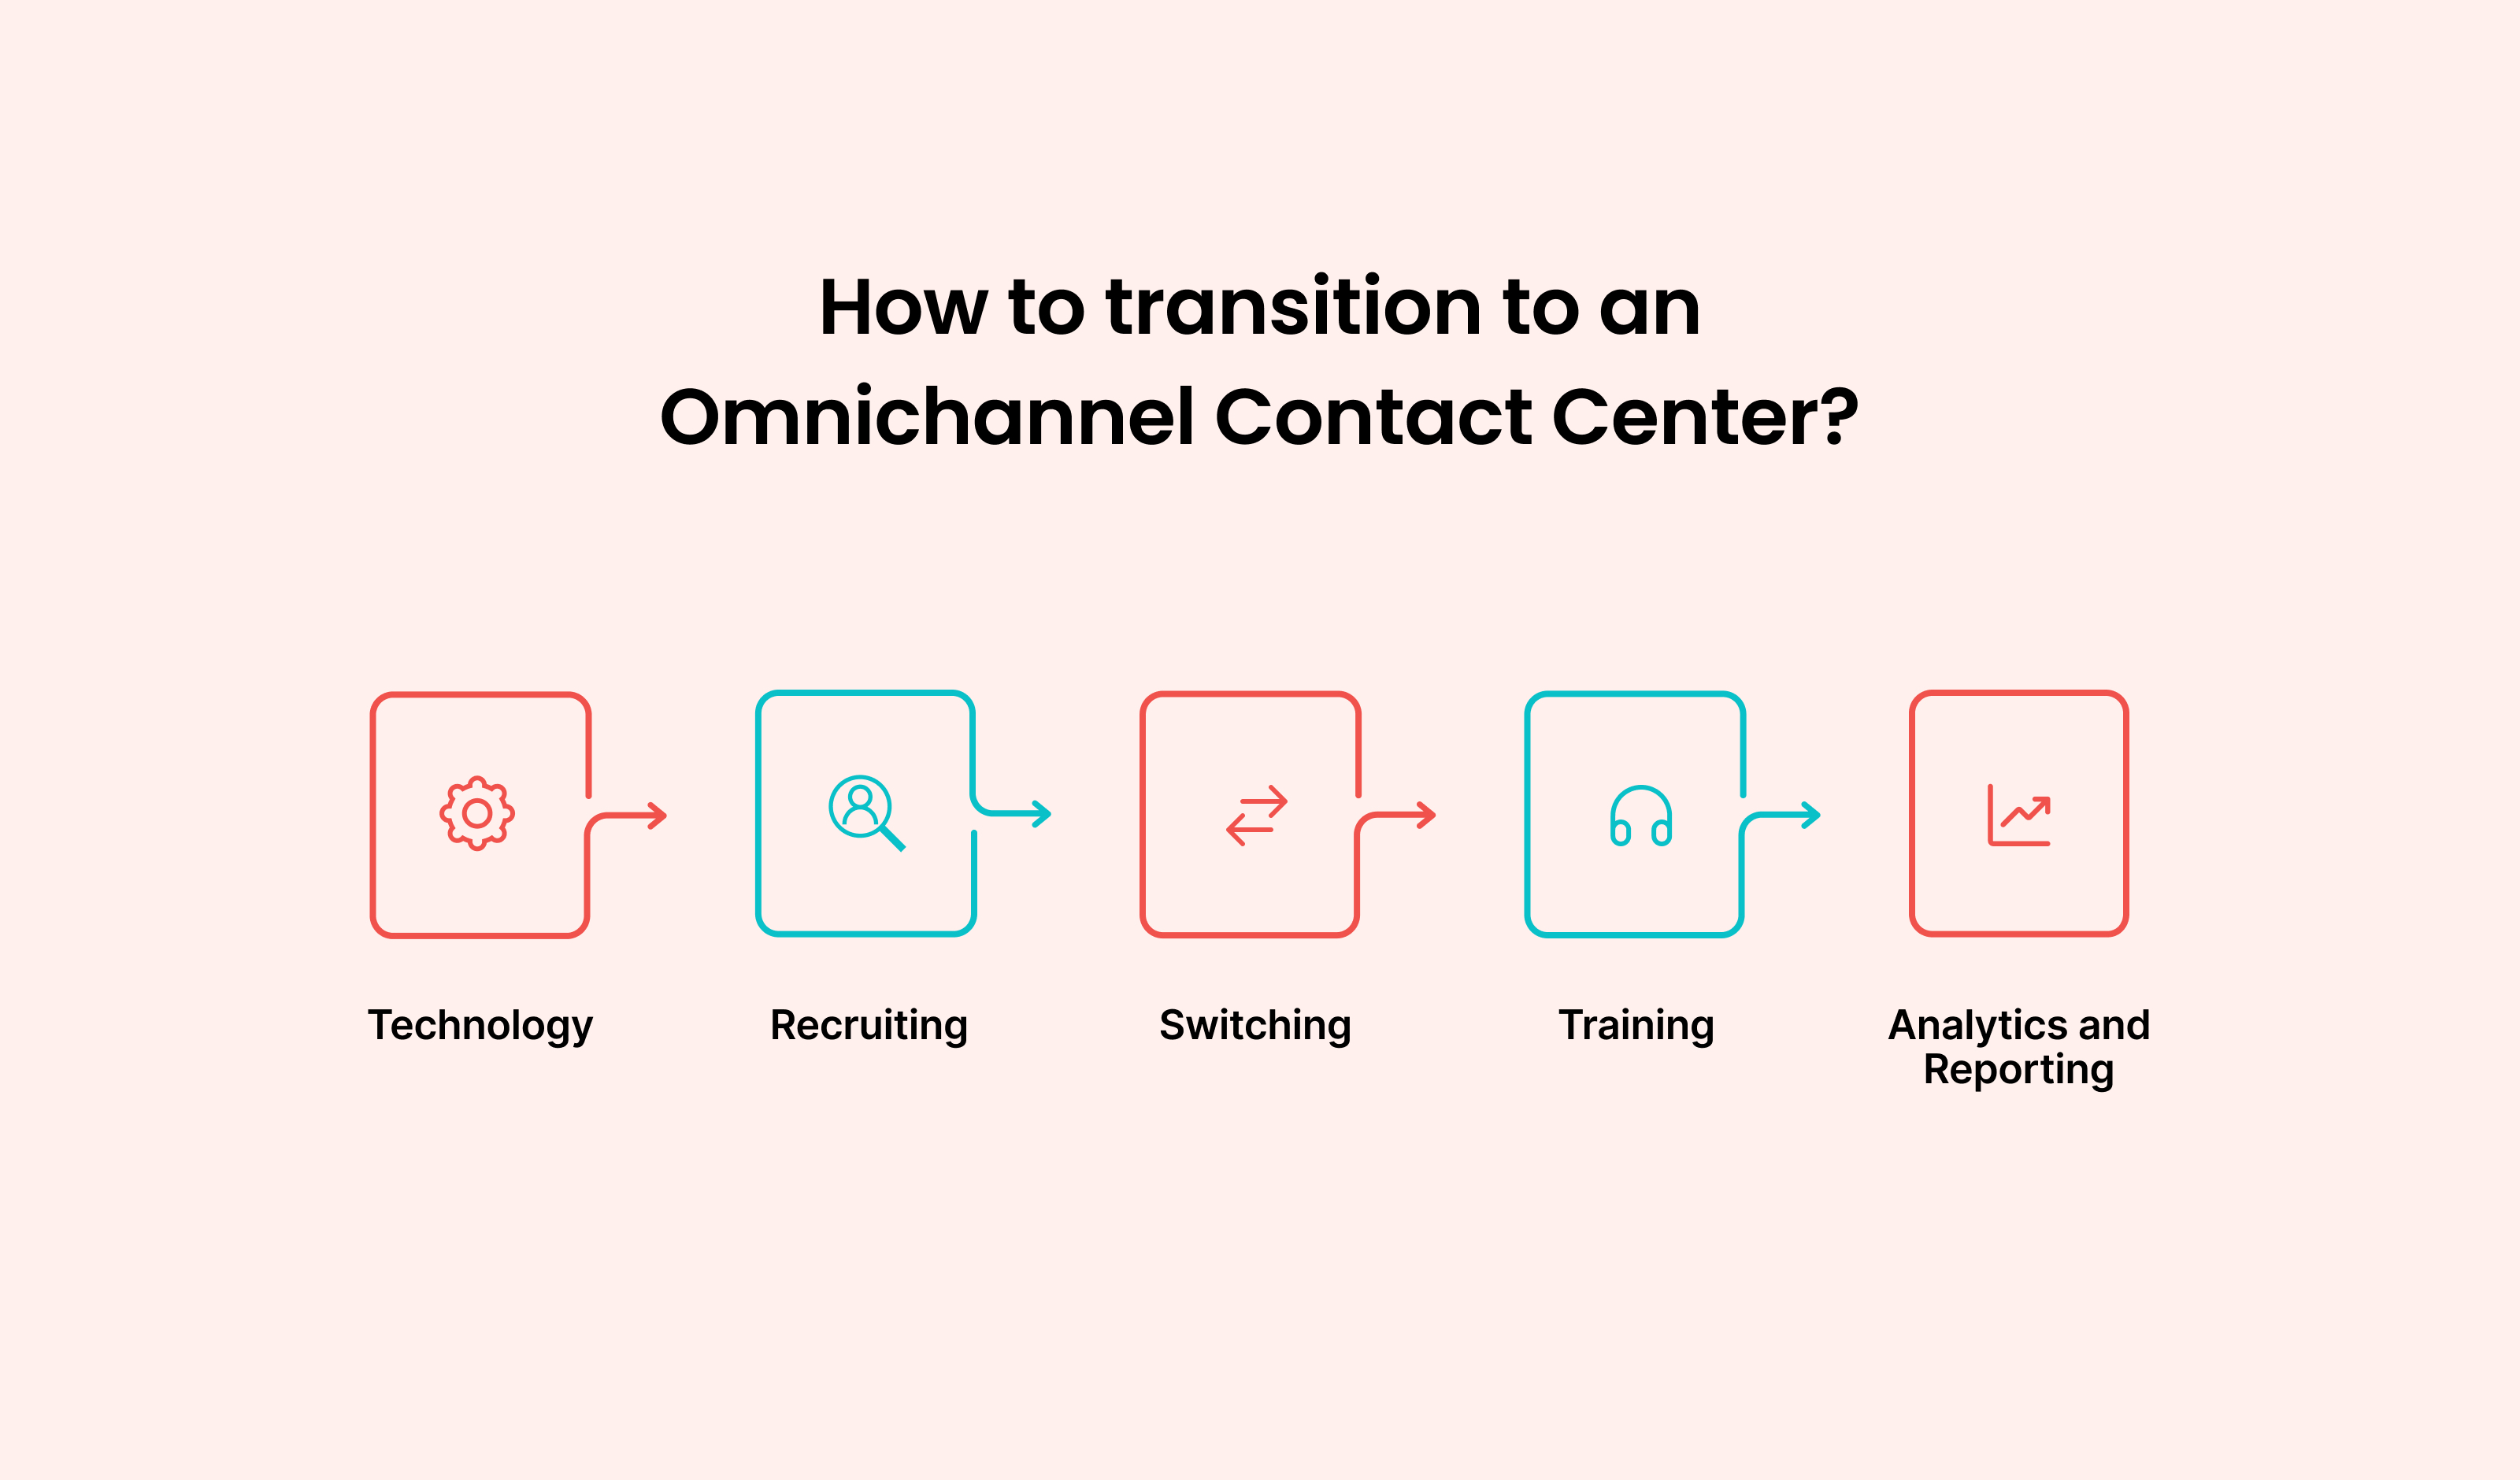 How to transition to an Omnichannel Contact Center?